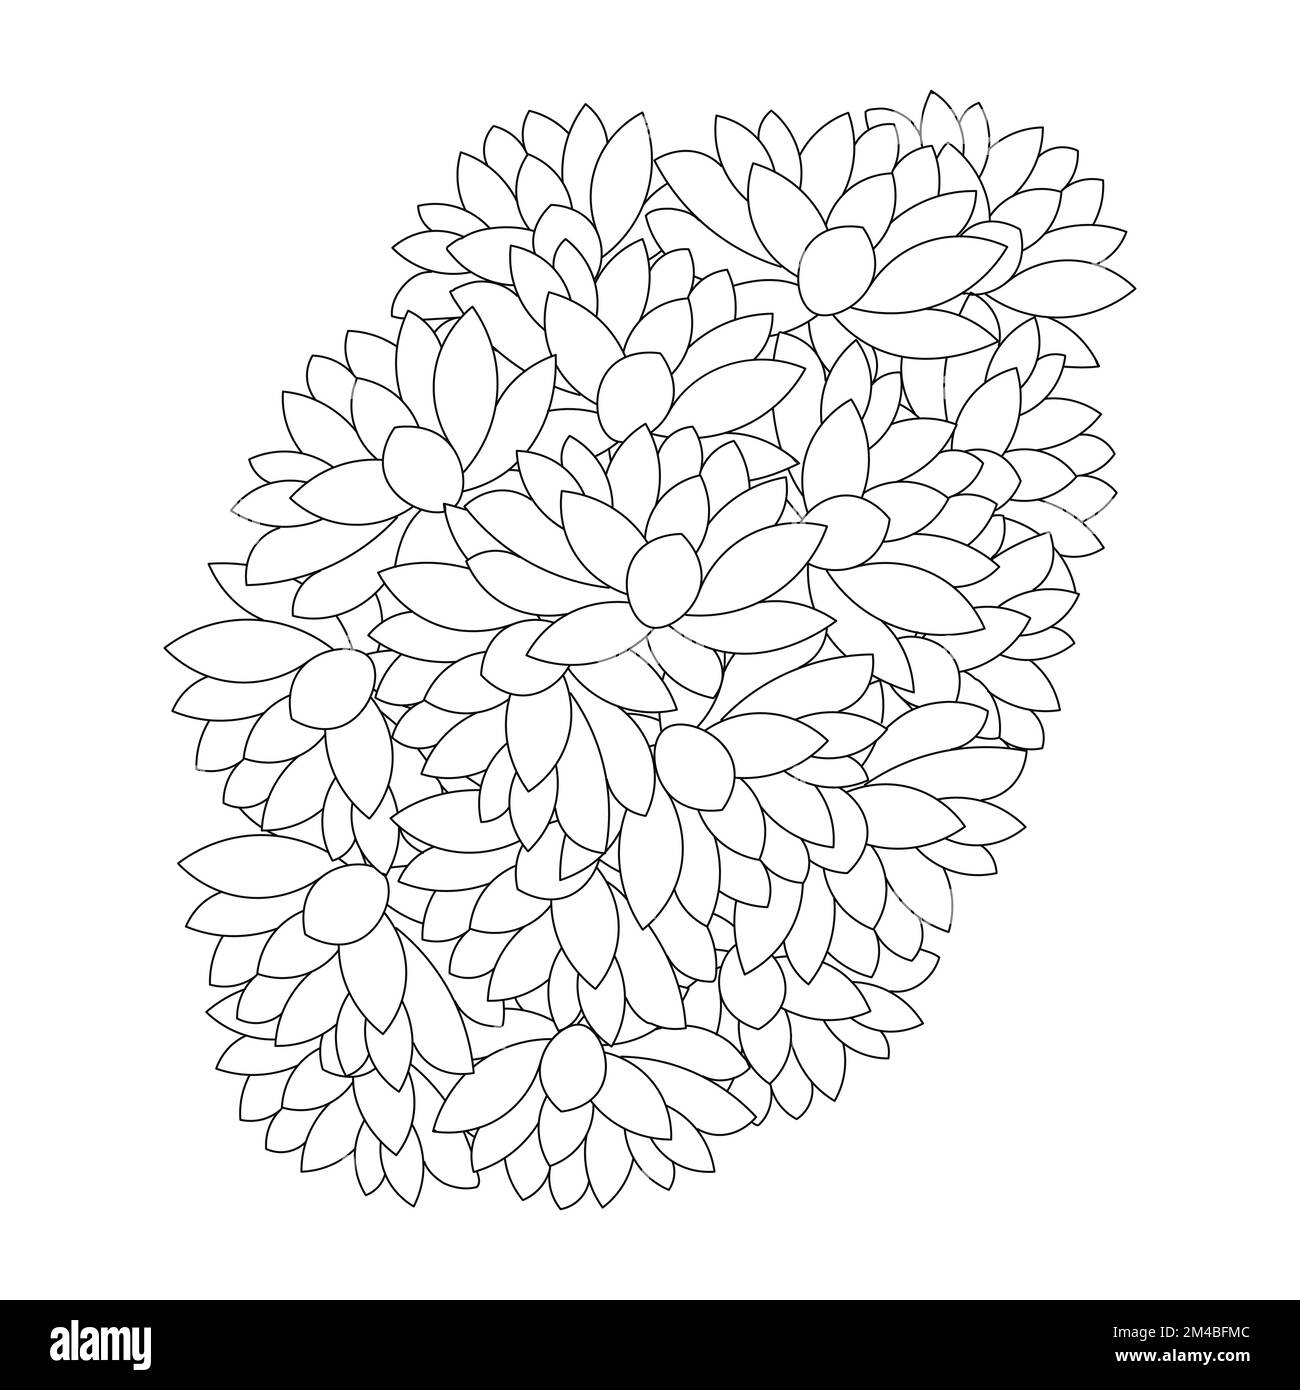 lotus flower coloring page of simplicity artistic drawn with blossom flower on isolated background Stock Vector